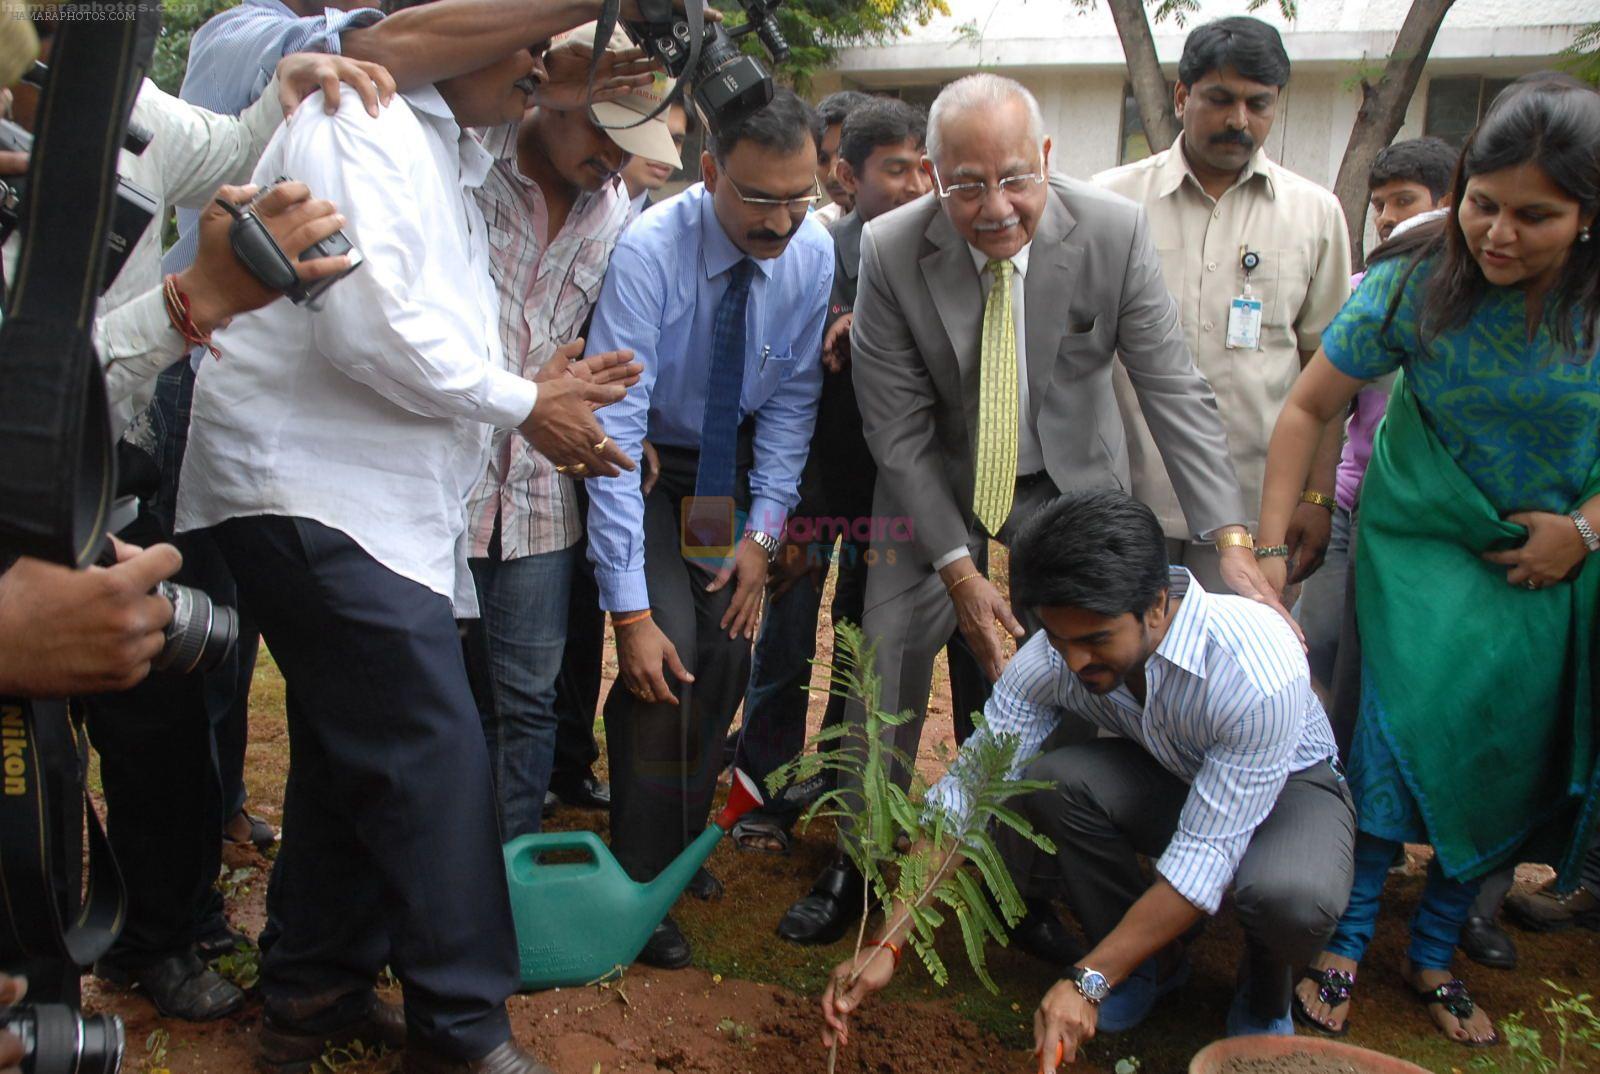 Ram Charan launches Apollo Go Green Initiative on 27 August 2011